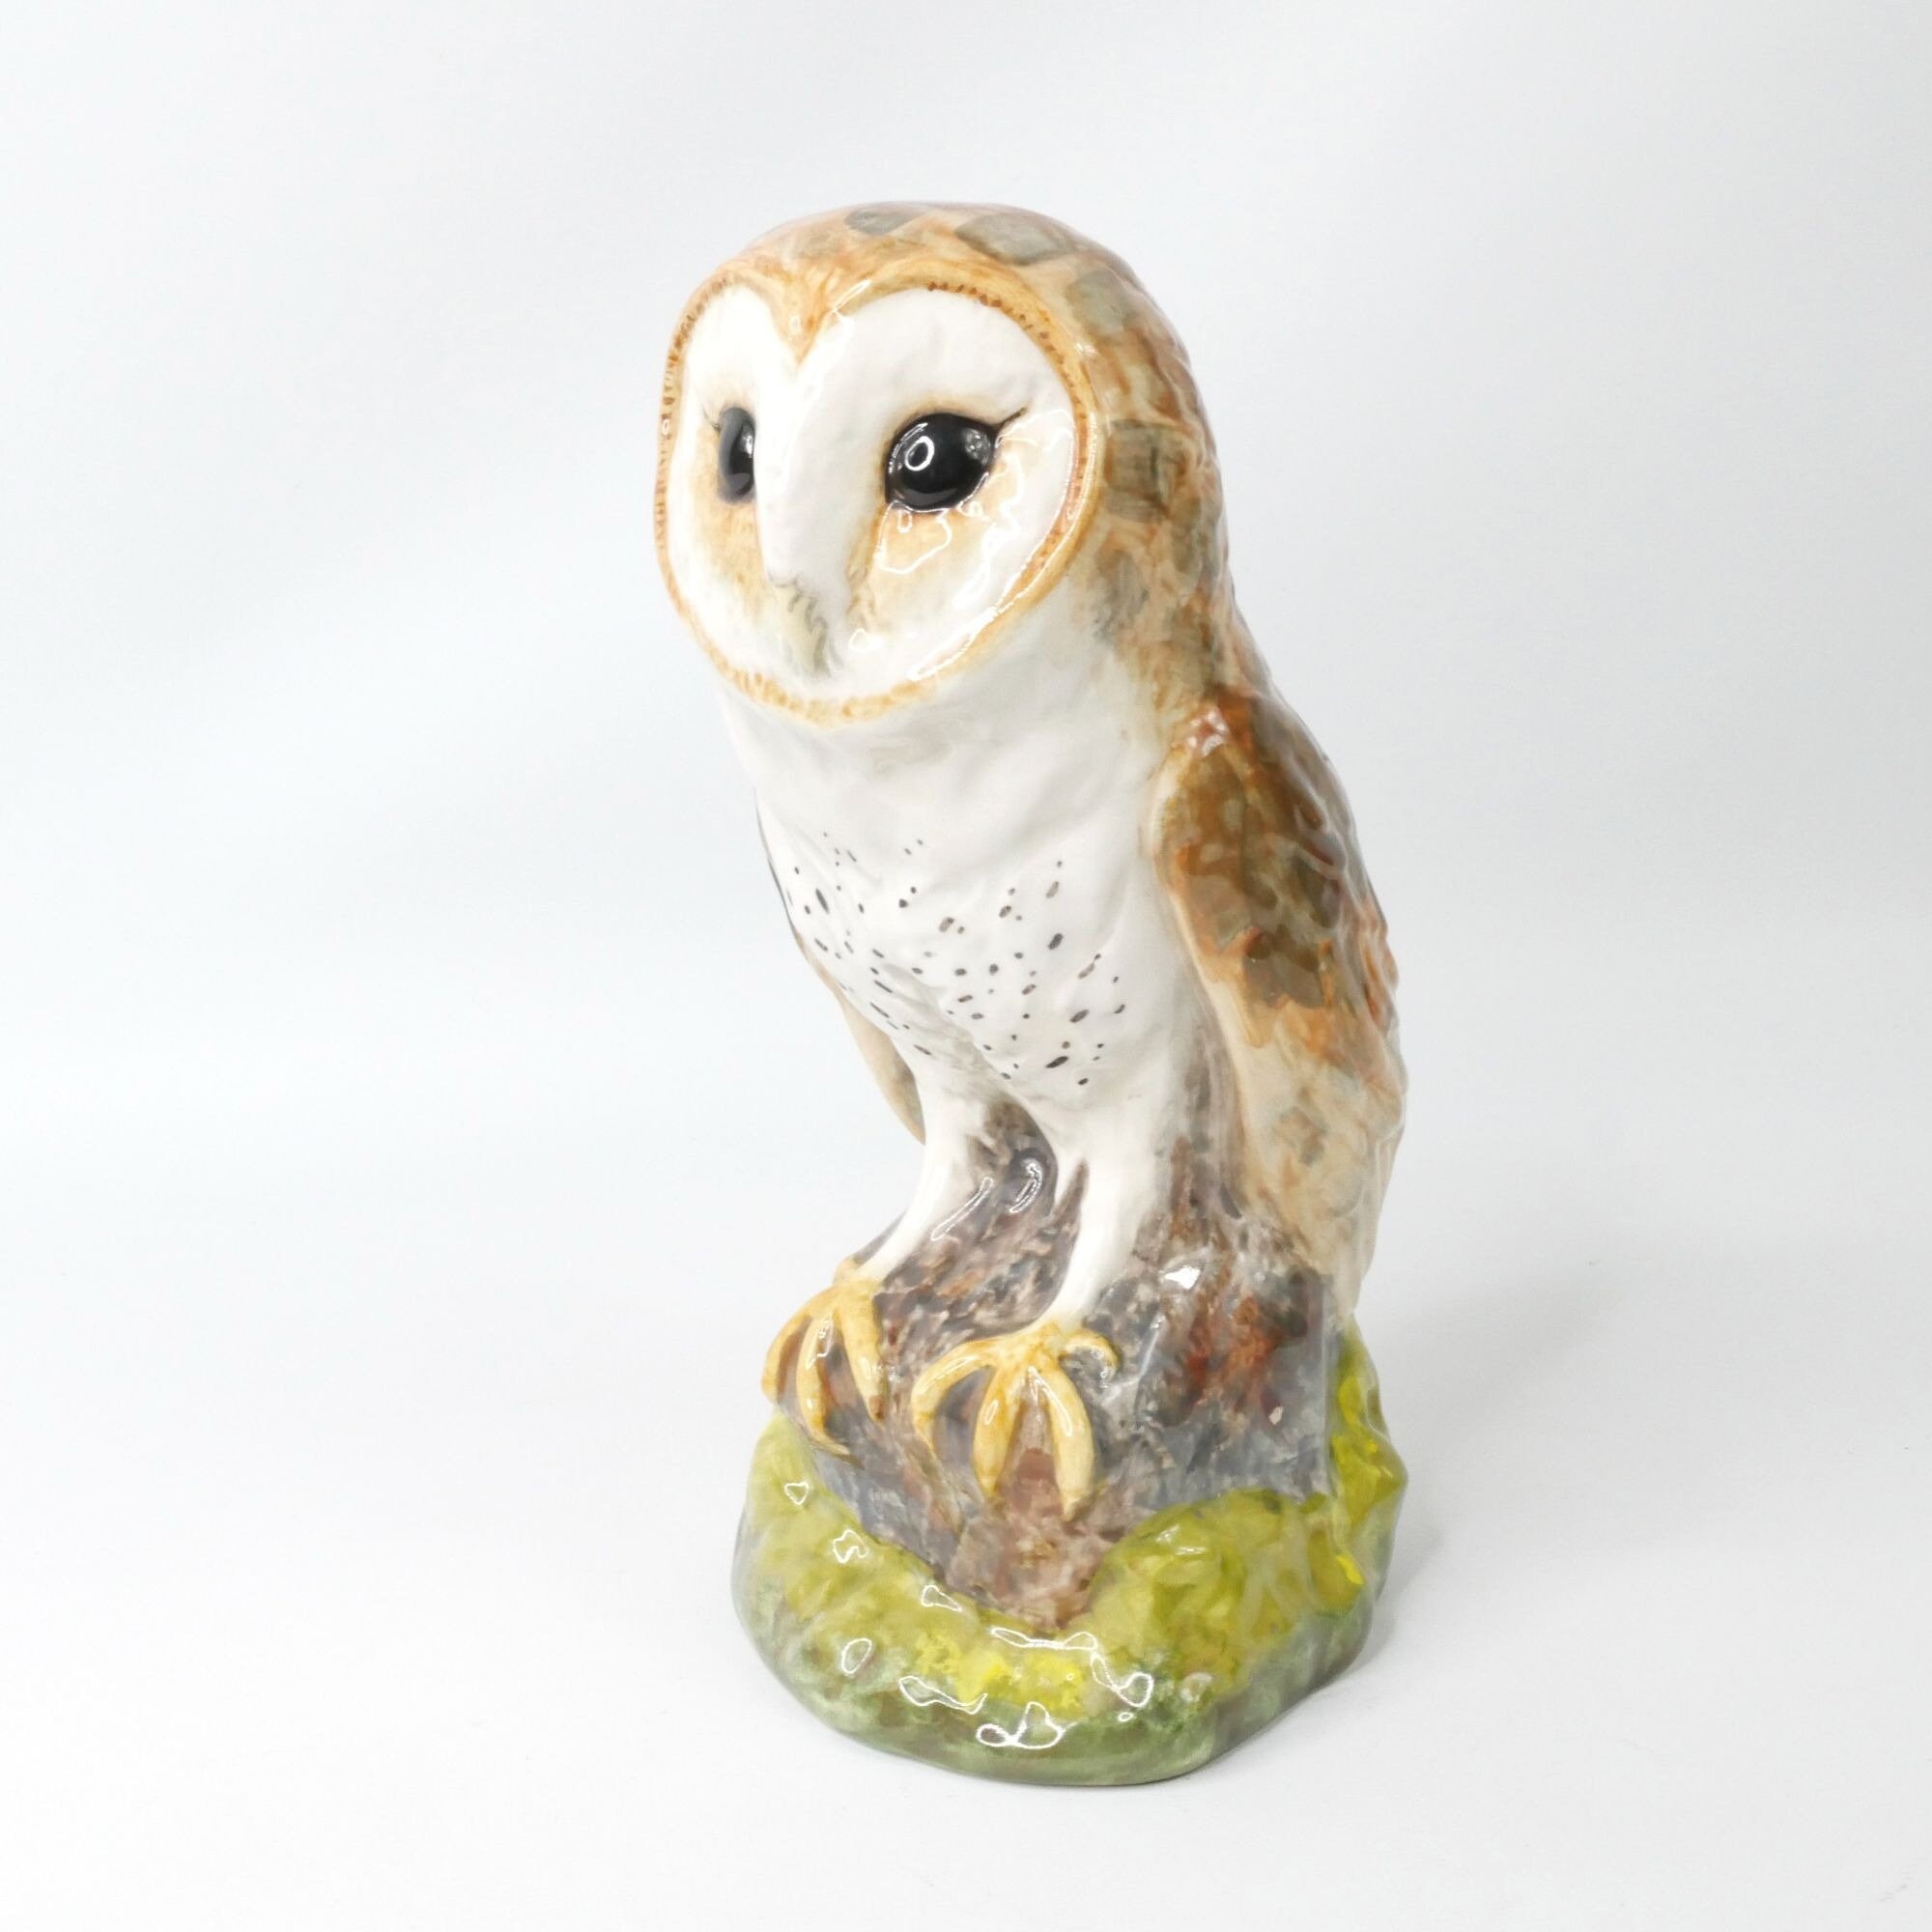 Made to Order Barn Owl Yarn Bowl Large Hand Painted Ceramic With Four Yarn  Channels Full Color 